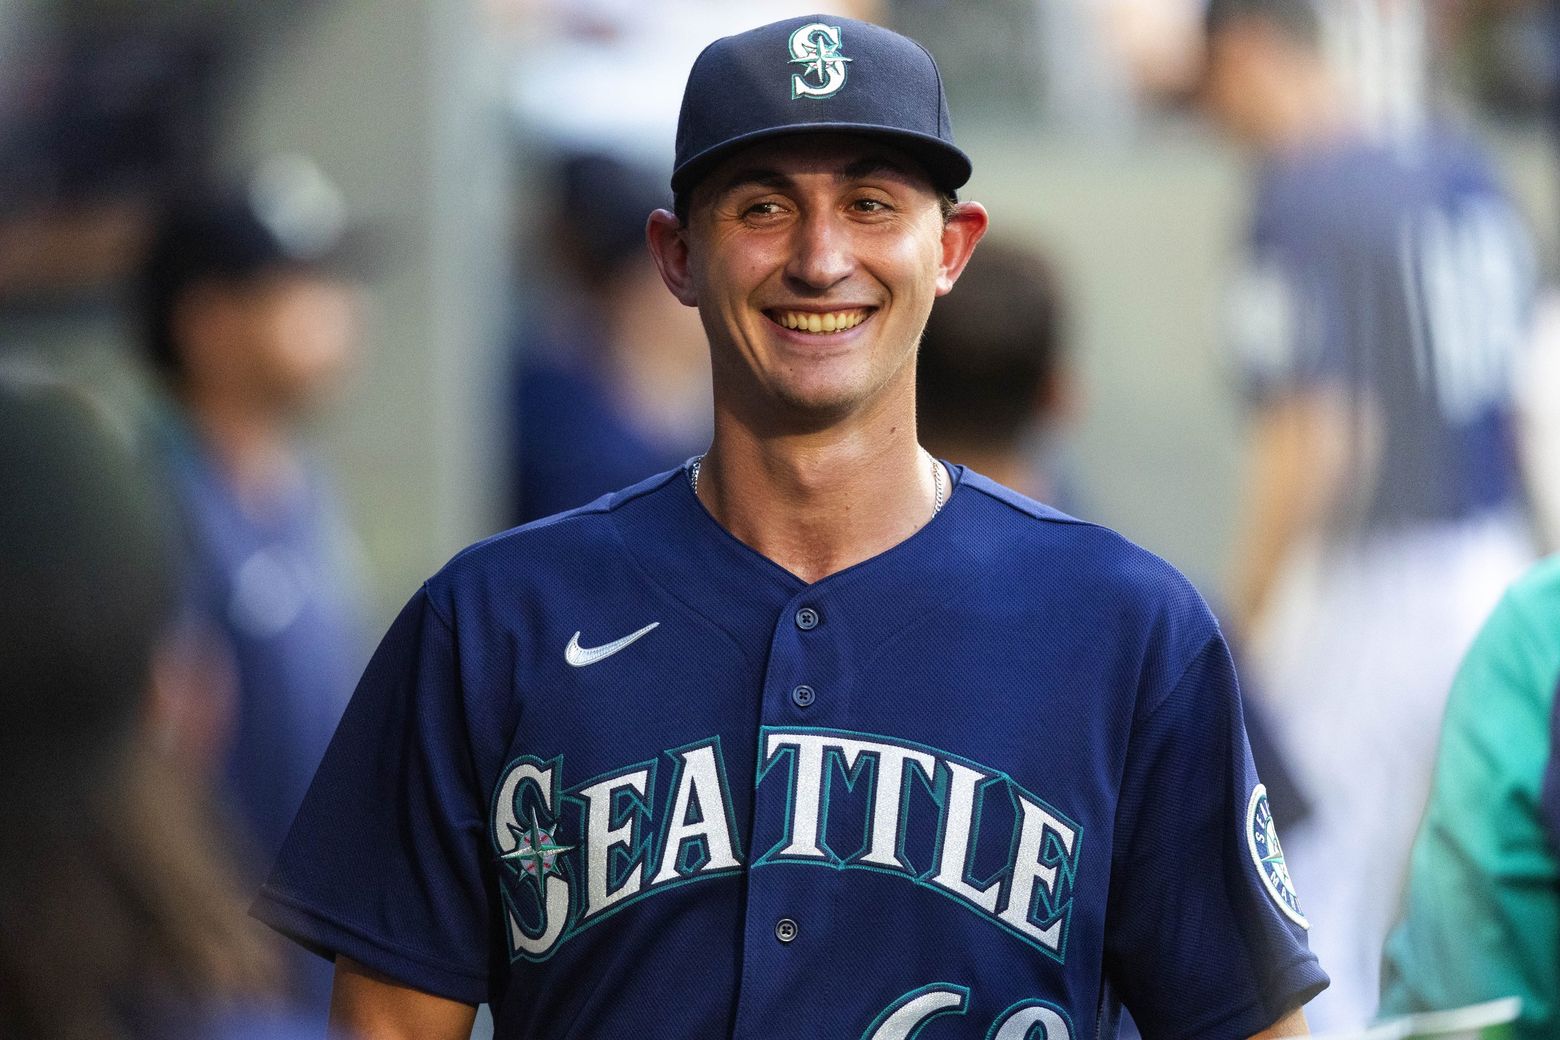 Mariners lineup news: Top pitching prospect George Kirby promoted